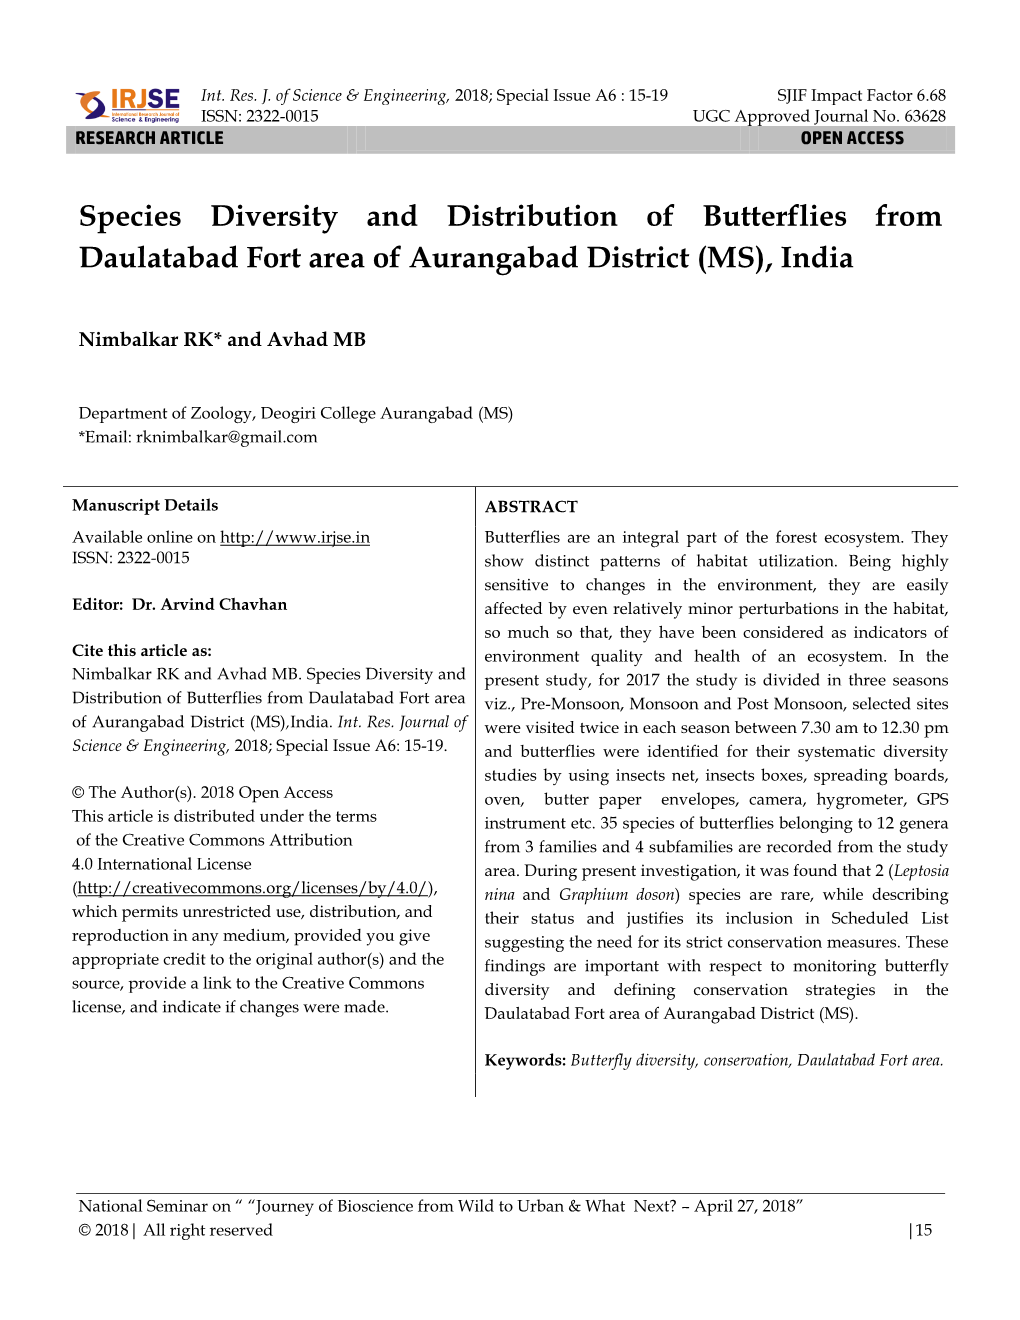 Species Diversity and Distribution of Butterflies from Daulatabad Fort Area of Aurangabad District (MS), India